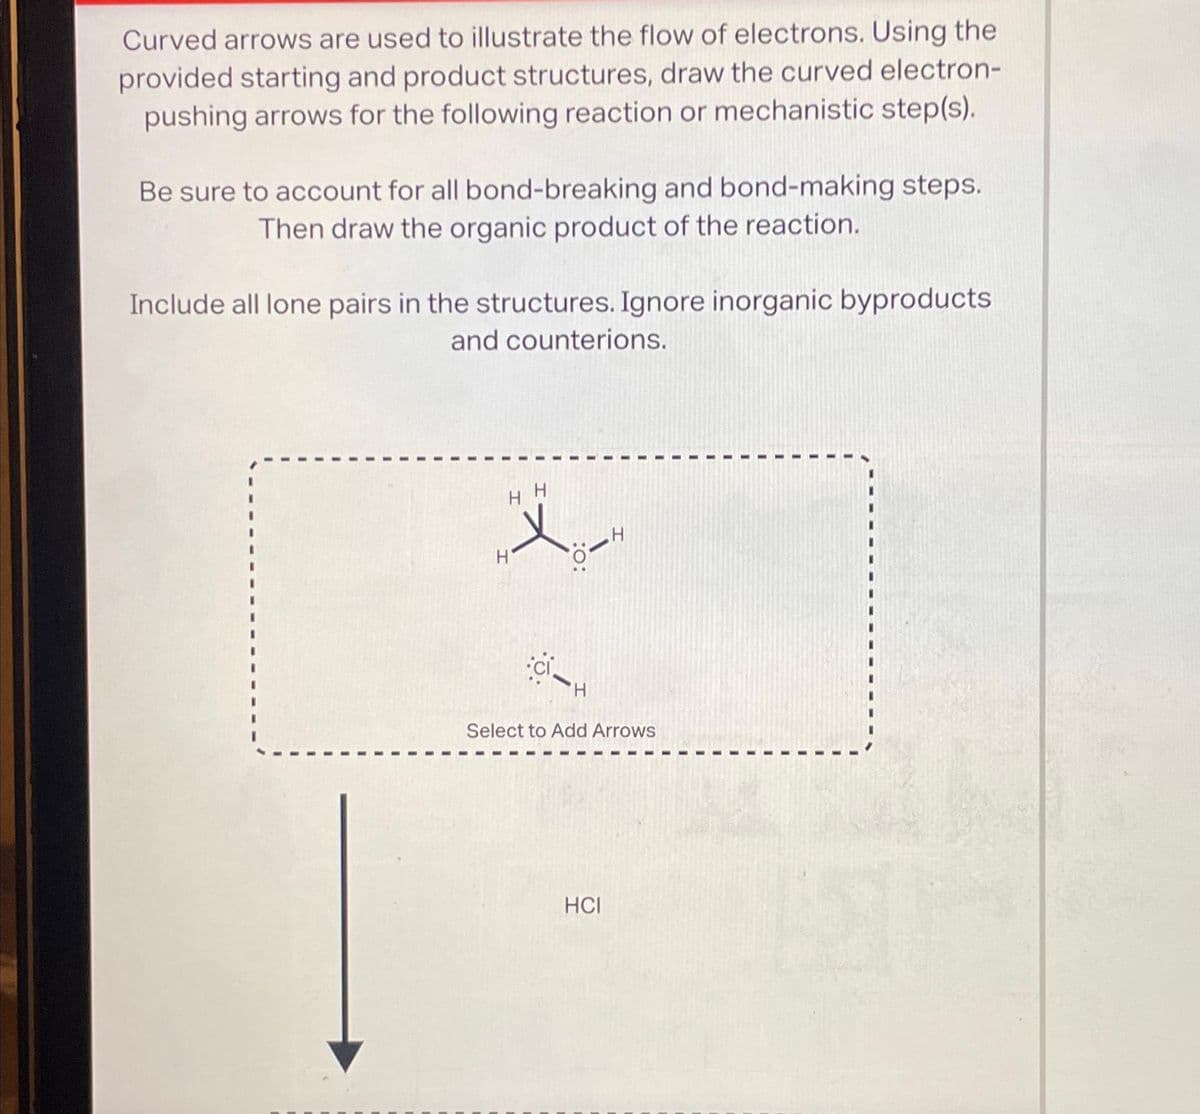 Curved arrows are used to illustrate the flow of electrons. Using the
provided starting and product structures, draw the curved electron-
pushing arrows for the following reaction or mechanistic step(s).
Be sure to account for all bond-breaking and bond-making steps.
Then draw the organic product of the reaction.
Include all lone pairs in the structures. Ignore inorganic byproducts
and counterions.
HH
H
ci
:O:
H
Select to Add Arrows
HCI